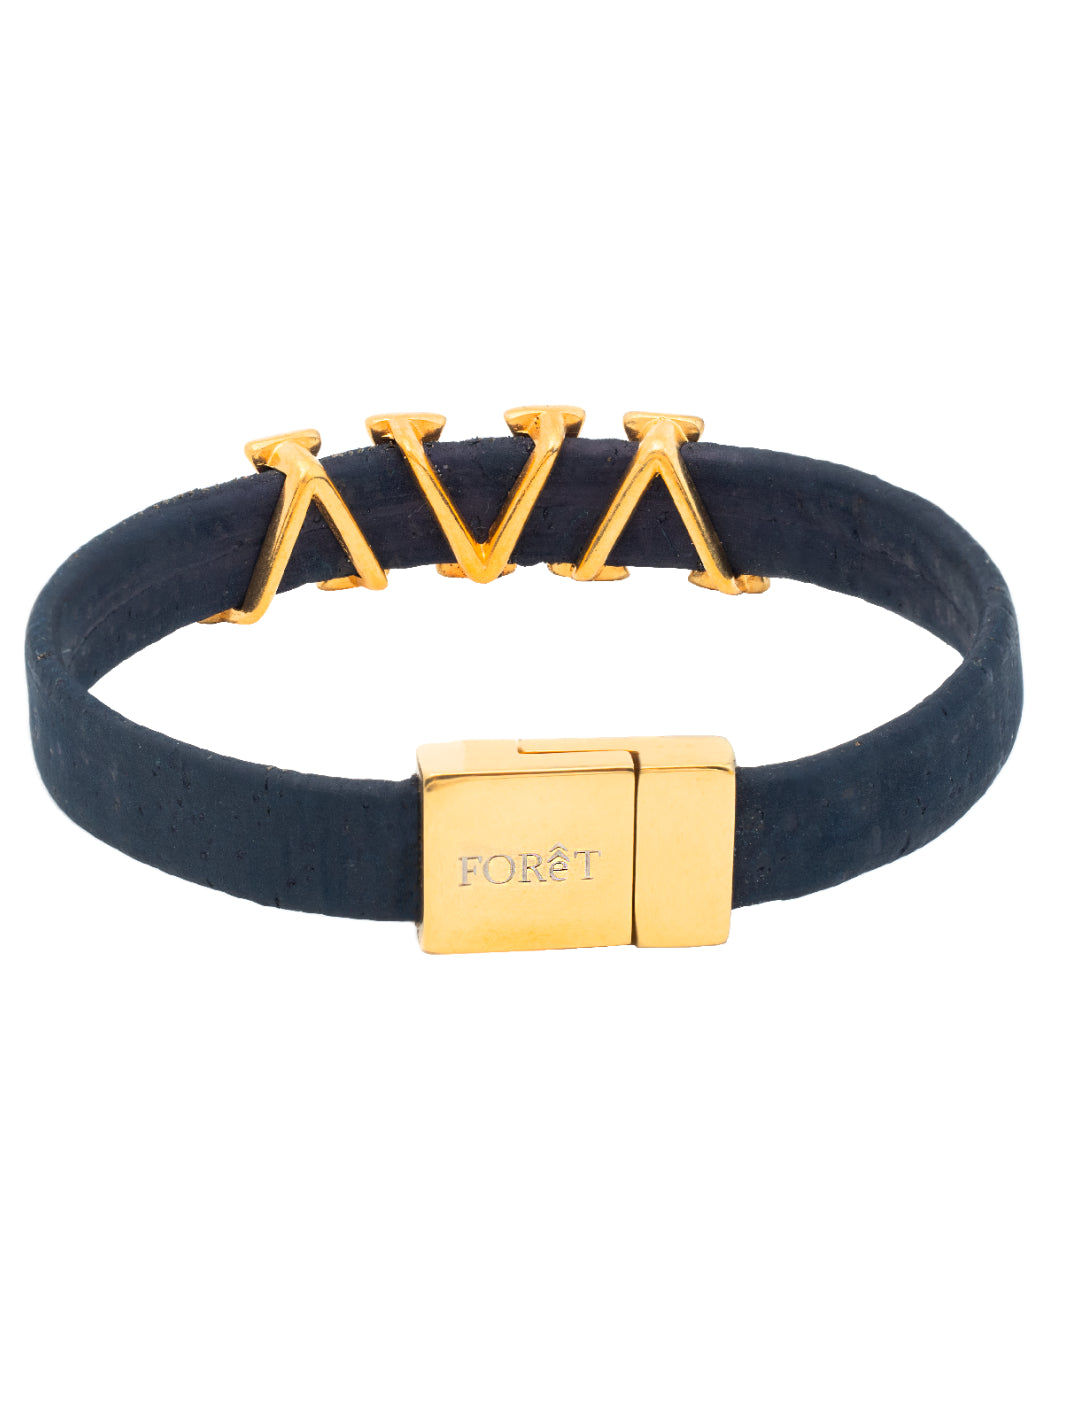 Introducing the GOLD SHARK TOOTH Cork Bracelet: bold navy-blue paired with luxurious gold, secured with a magnetic clasp for easy wear. A striking statement of elegance at just 14g.